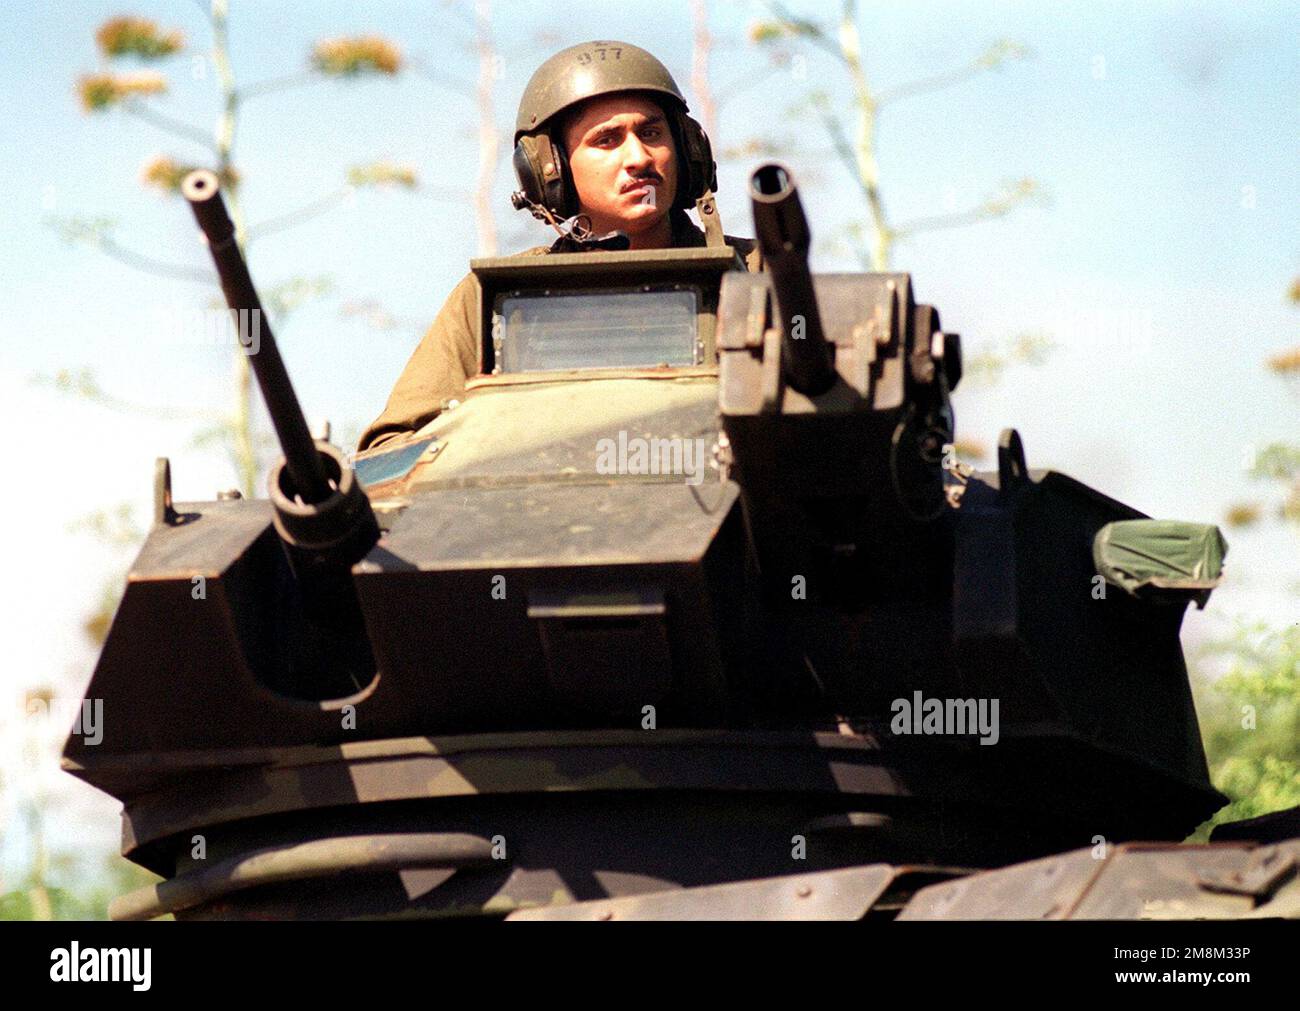 US Marine Corps Lance Corporal Fabian Jasso mans the gun turret of an Assault Amphibious Vehicle (AAV) during an amphibious assault conducted as part of RIMPAC 96 at Pacific Missile Range Facility, Barking Sands, Kauai, Hawaii, by the 11th Marine Expeditionary Unit from Camp Pendleton, California, and involved Navy and Marine air, ground and sea forces for training as a combined amphibious assault force. Subject Operation/Series: RIMPAC '96 Base: Kauai State: Hawaii (HI) Country: United States Of America (USA) Stock Photo